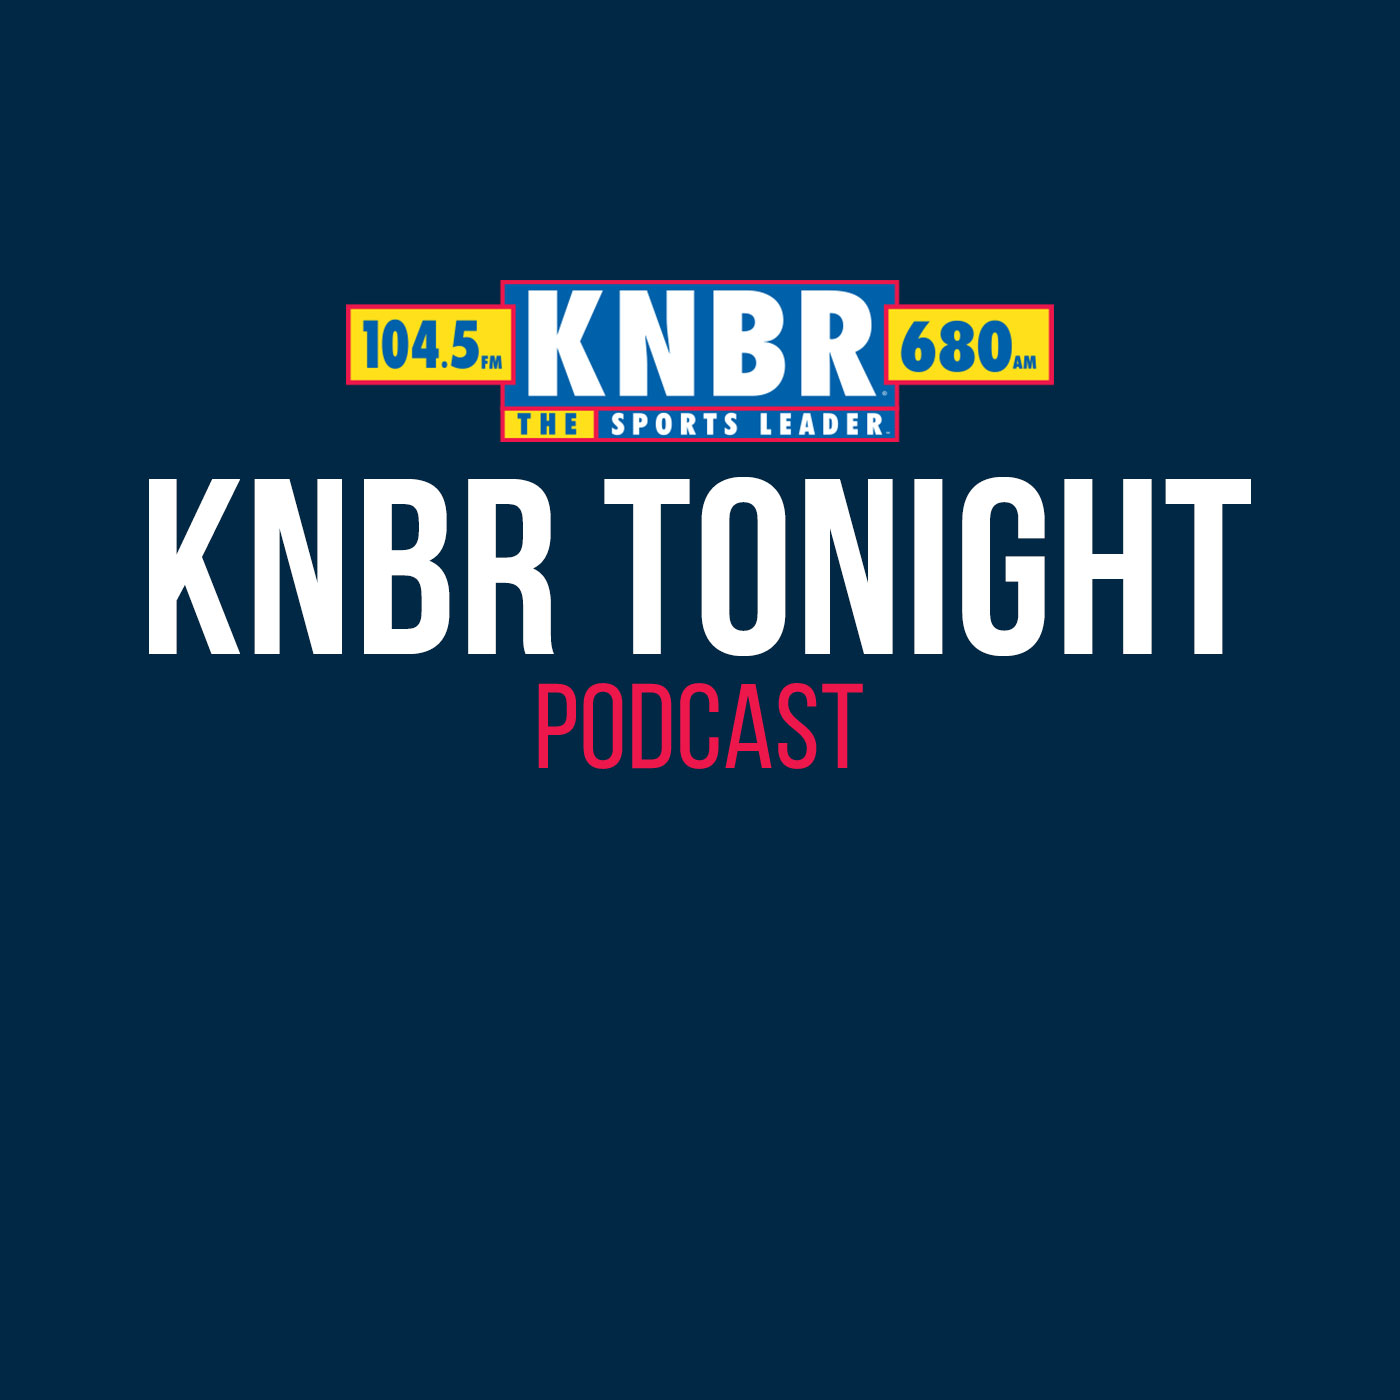 3-1 Eric Edholm joins KNBR Tonight with Kerry to talk about what NFL prospects might impress scouts at the 2022 NFL Combine